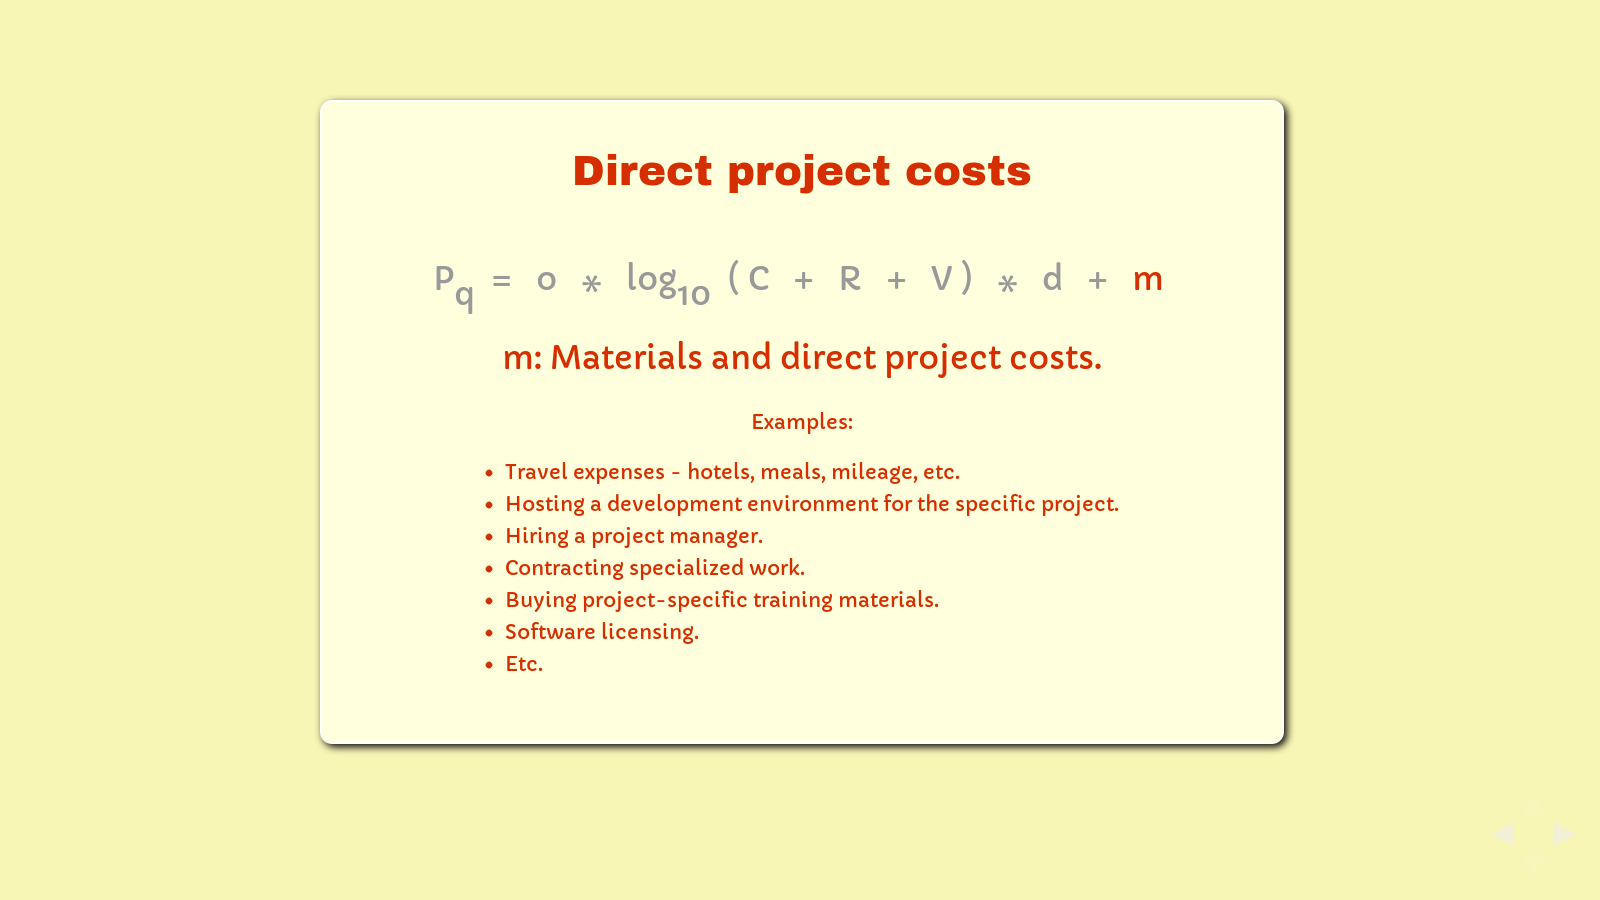 Slide: Project costs, 'm'